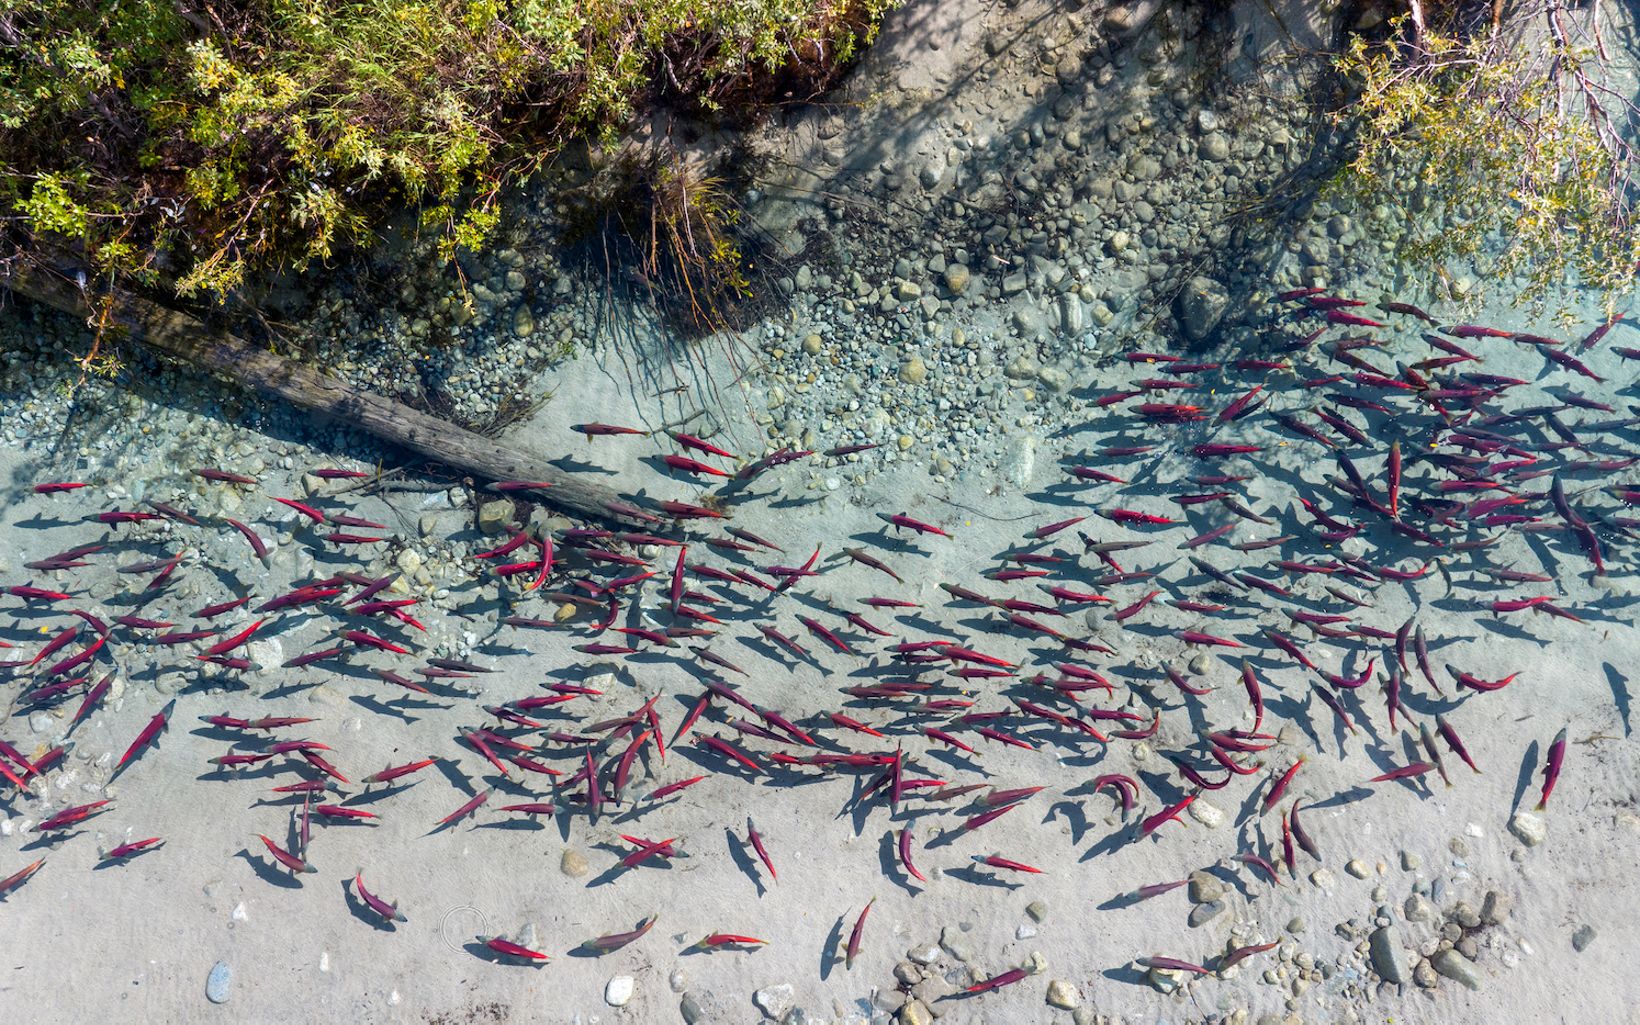 Large group of brightly colored salmon swimming in the clear waters of a rocky river's edge.